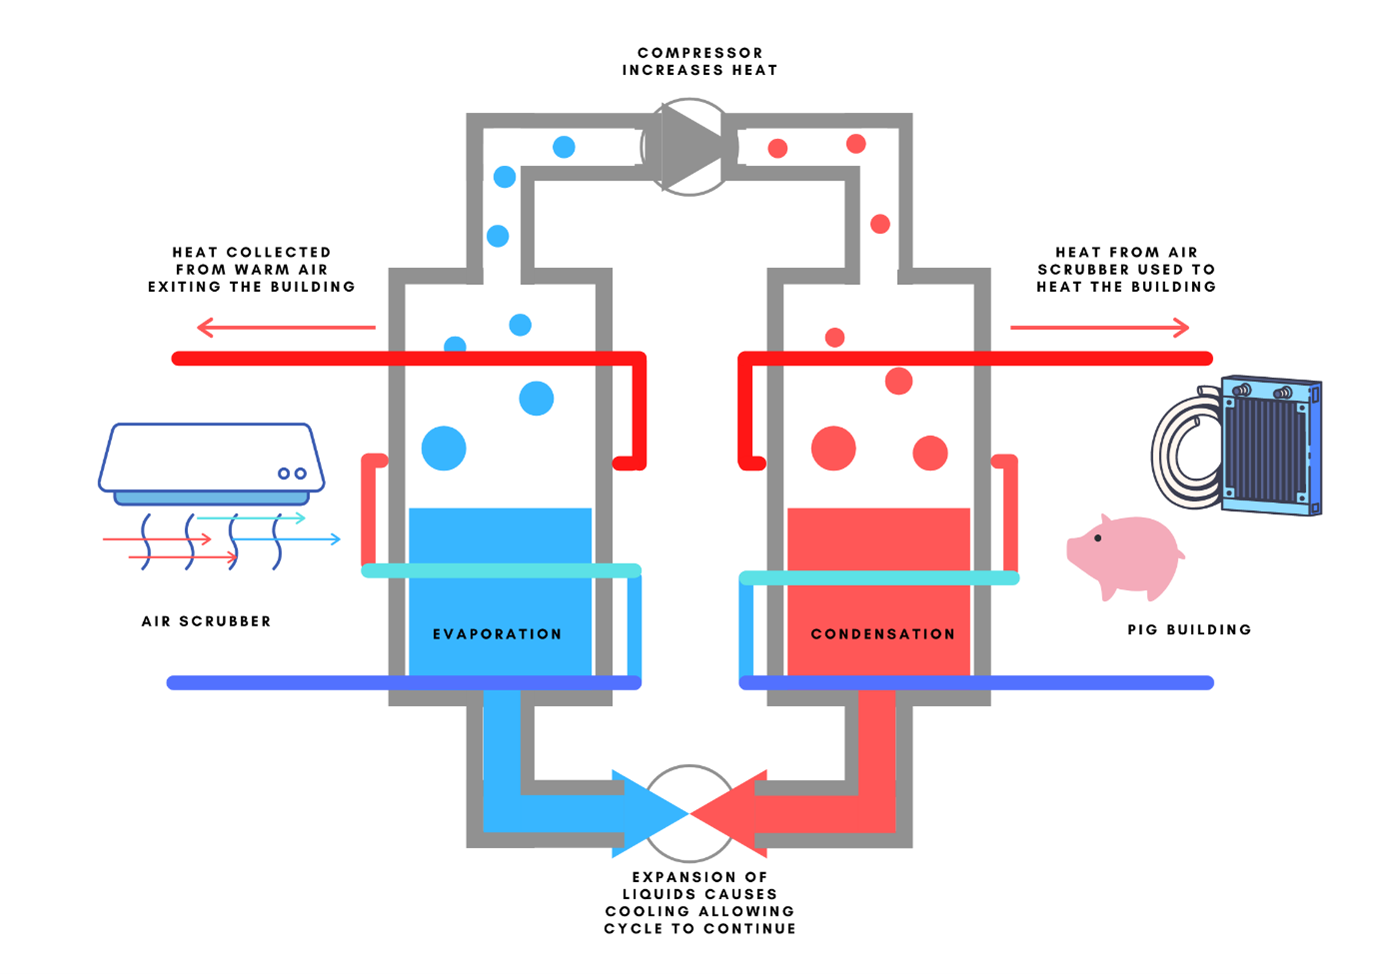 Diagram of an air scrubber in a pig building